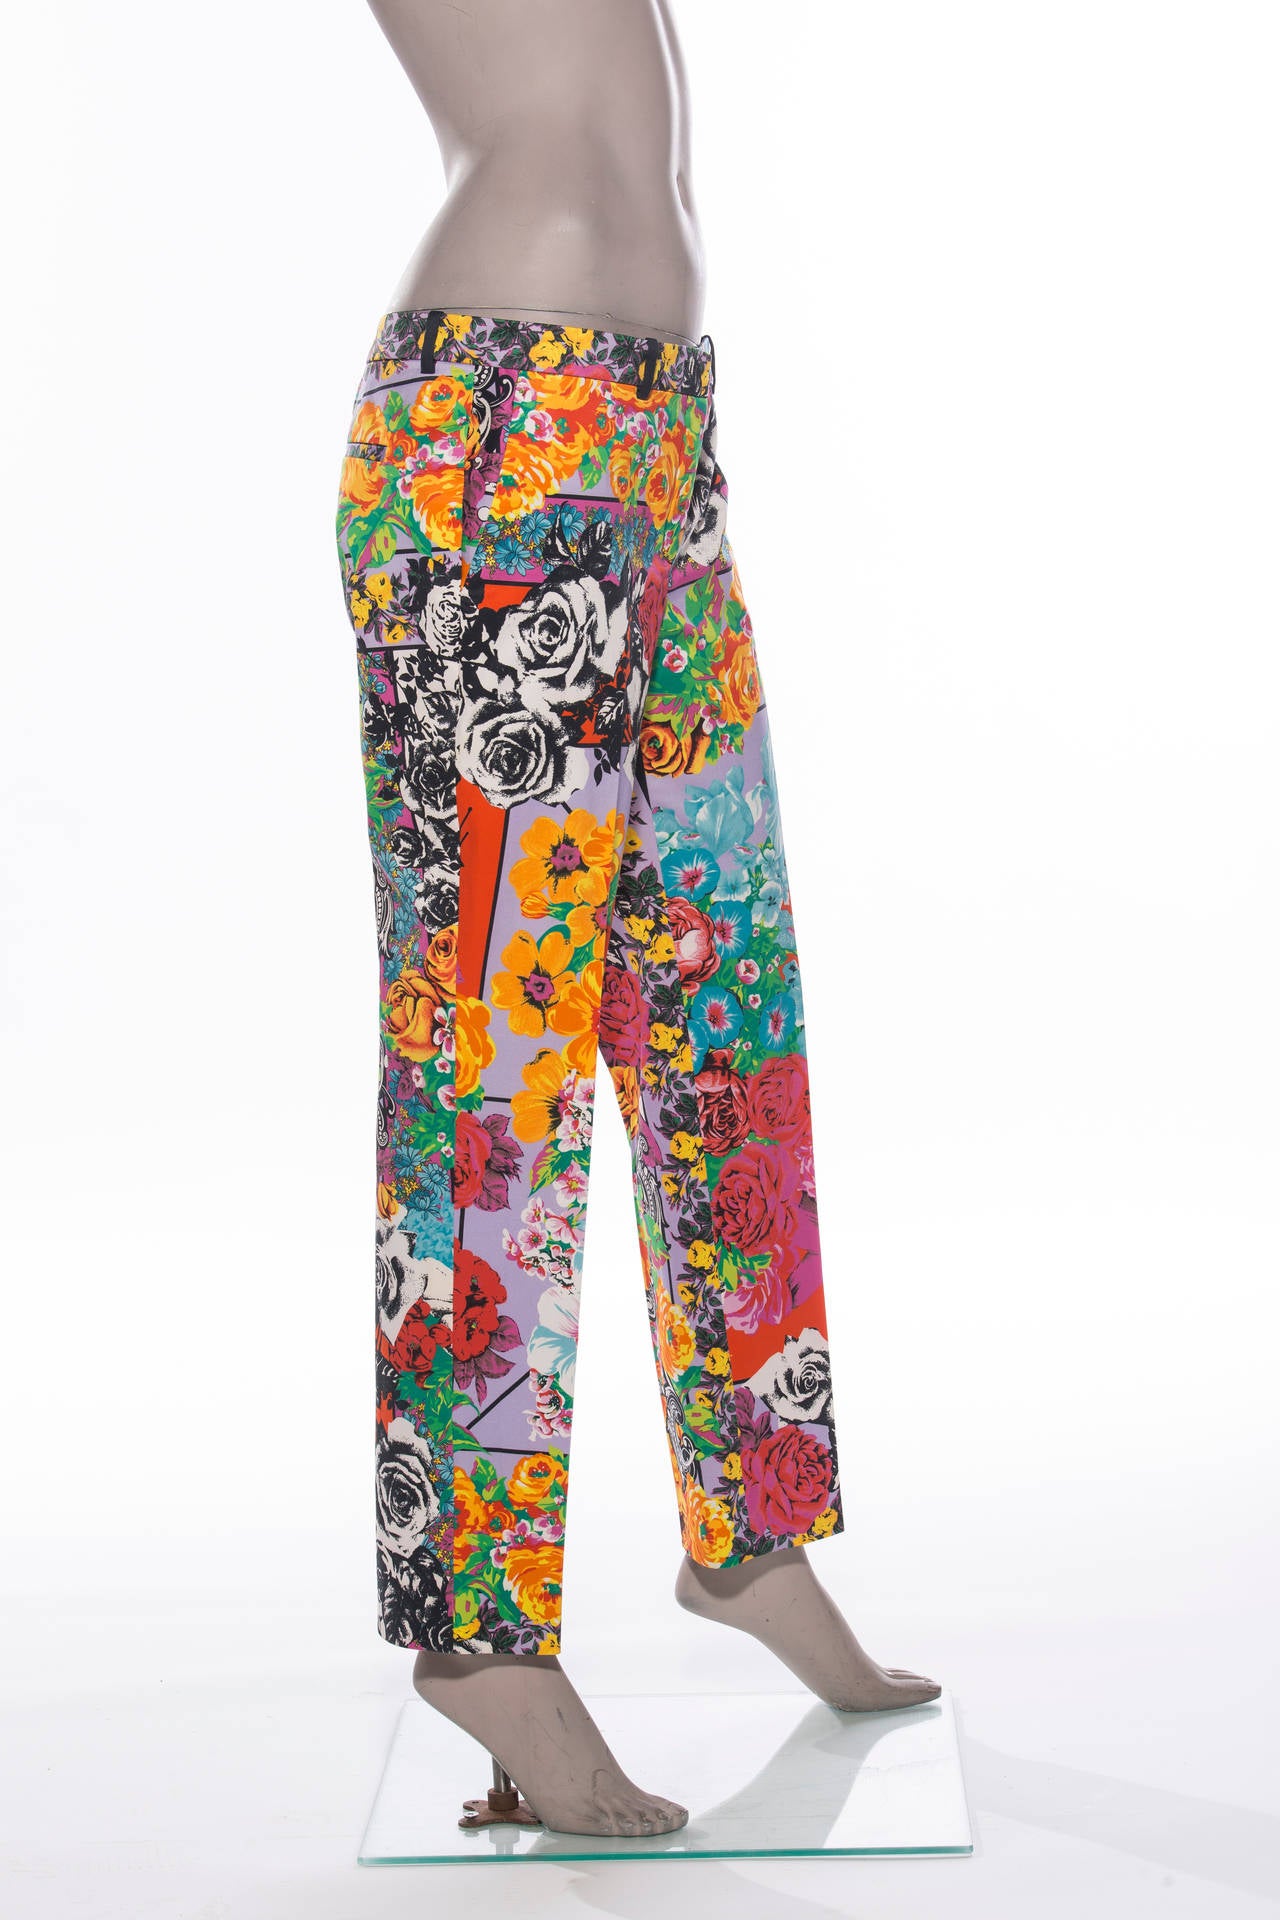 Versace multicolor pants with rose print, two front pockets, two back pockets and front fly closure.

Waist 34”, Hip 36”, Rise 8.5”, Inseam 28”, Leg Opening 13”

EU. 44
US. 8